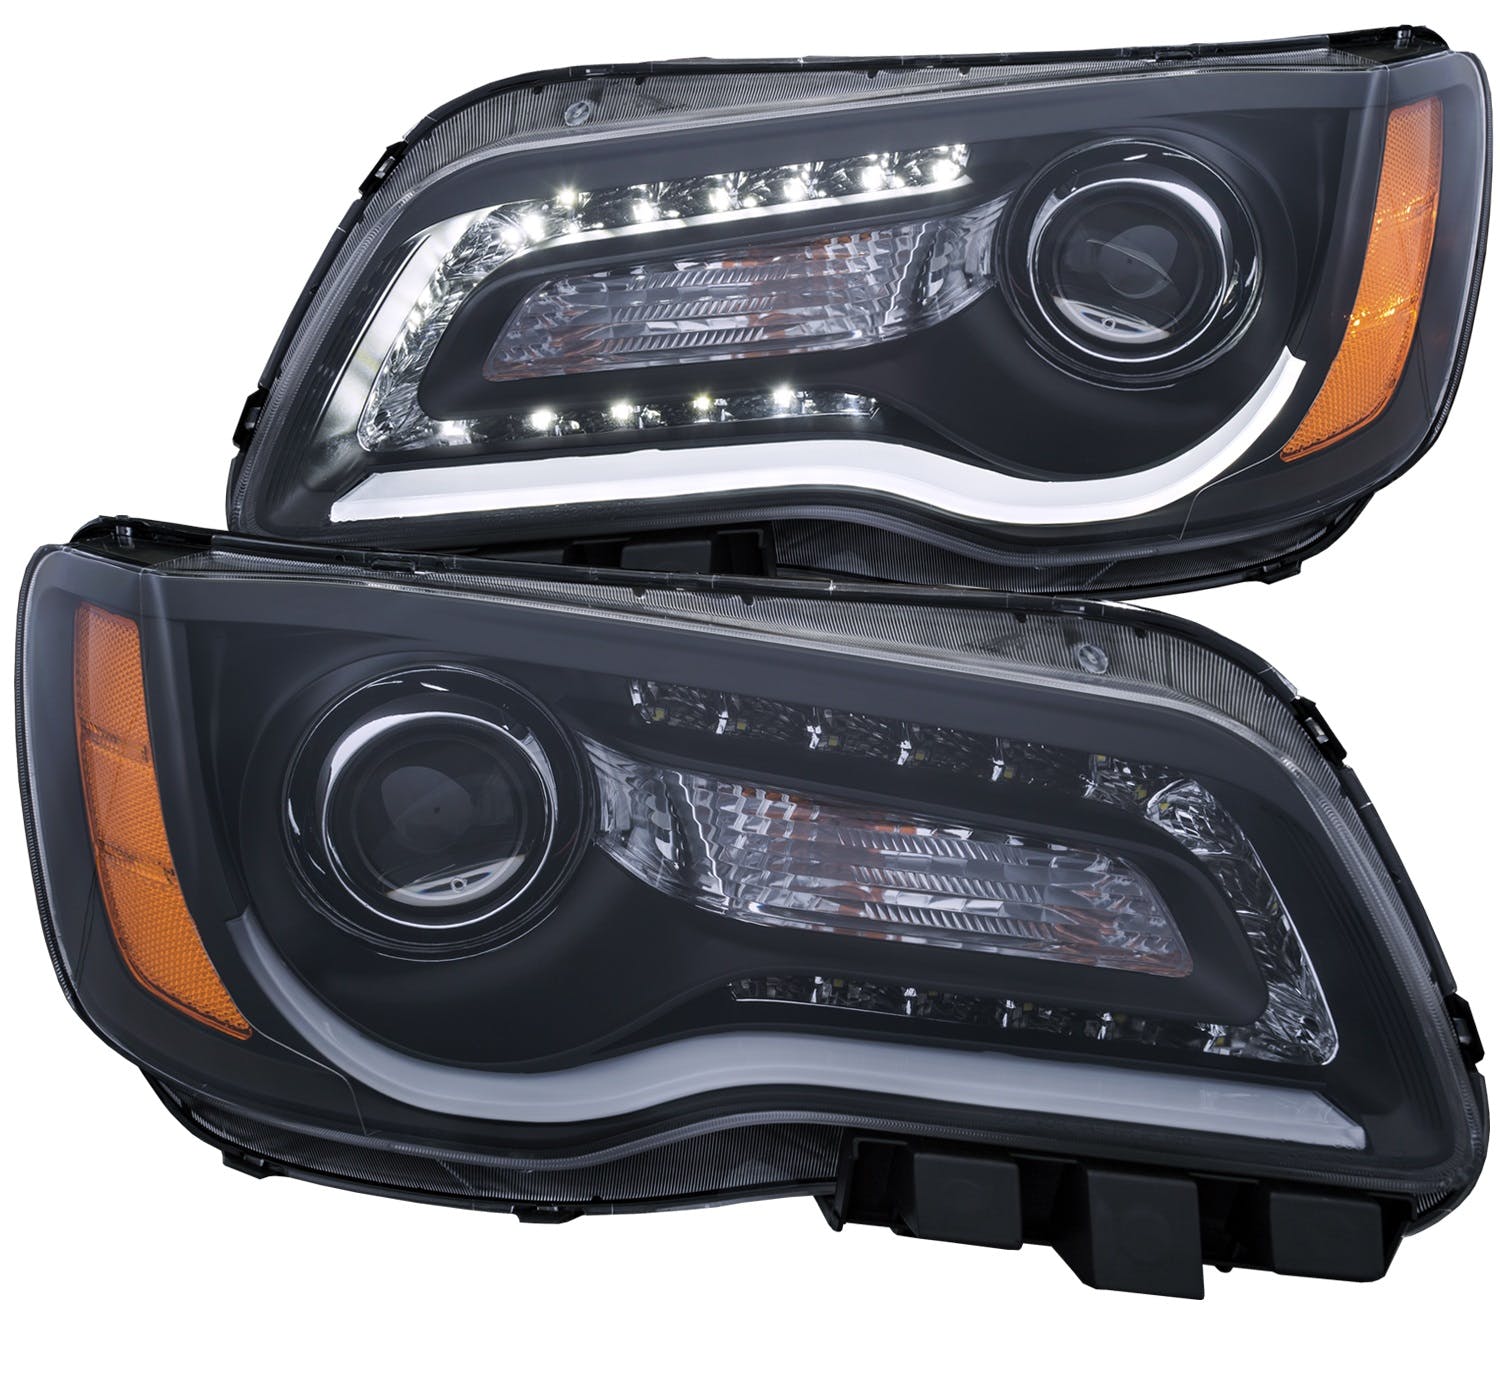 AnzoUSA 121495 Projector Headlights with Plank Style Design Black